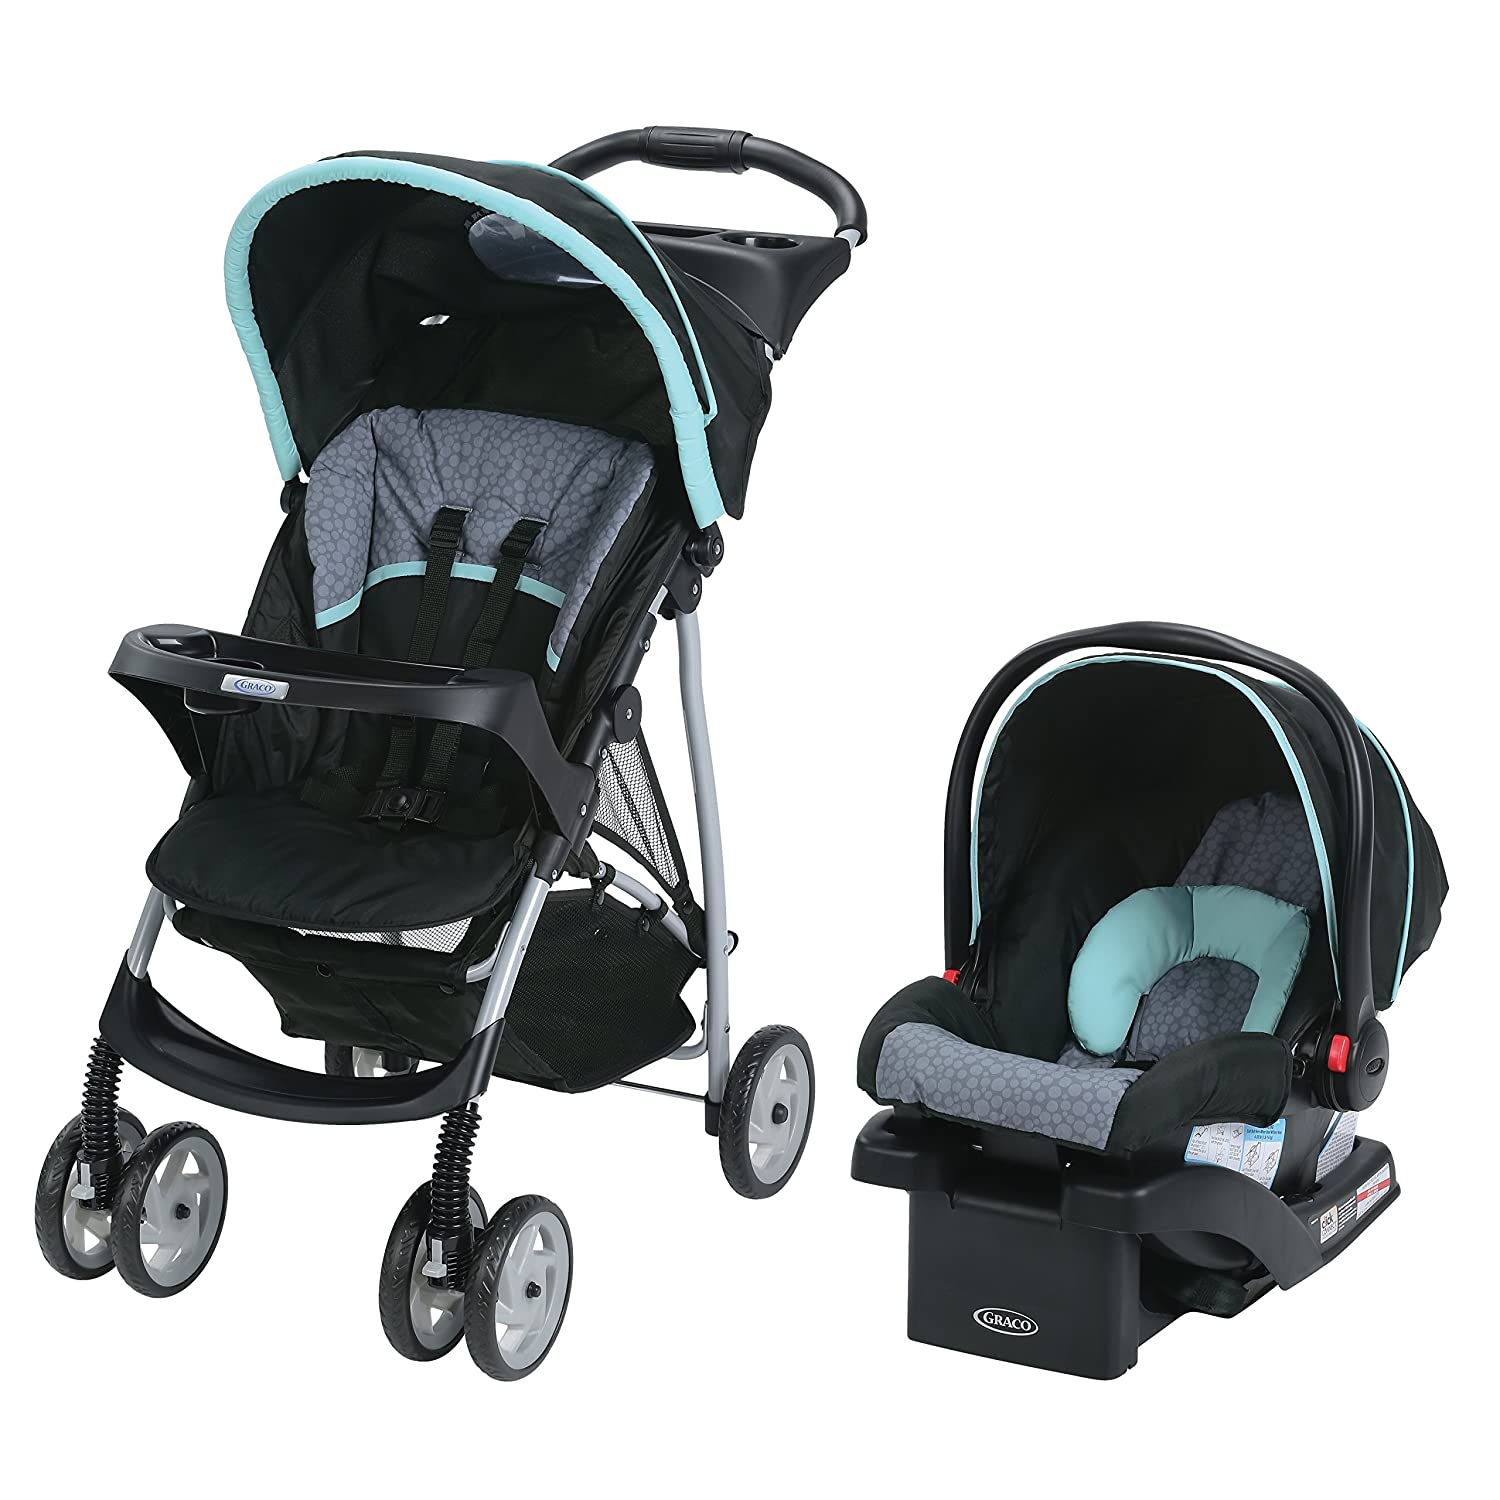 Top 10 Newest and Best Baby Strollers to Consider Buying in 2017